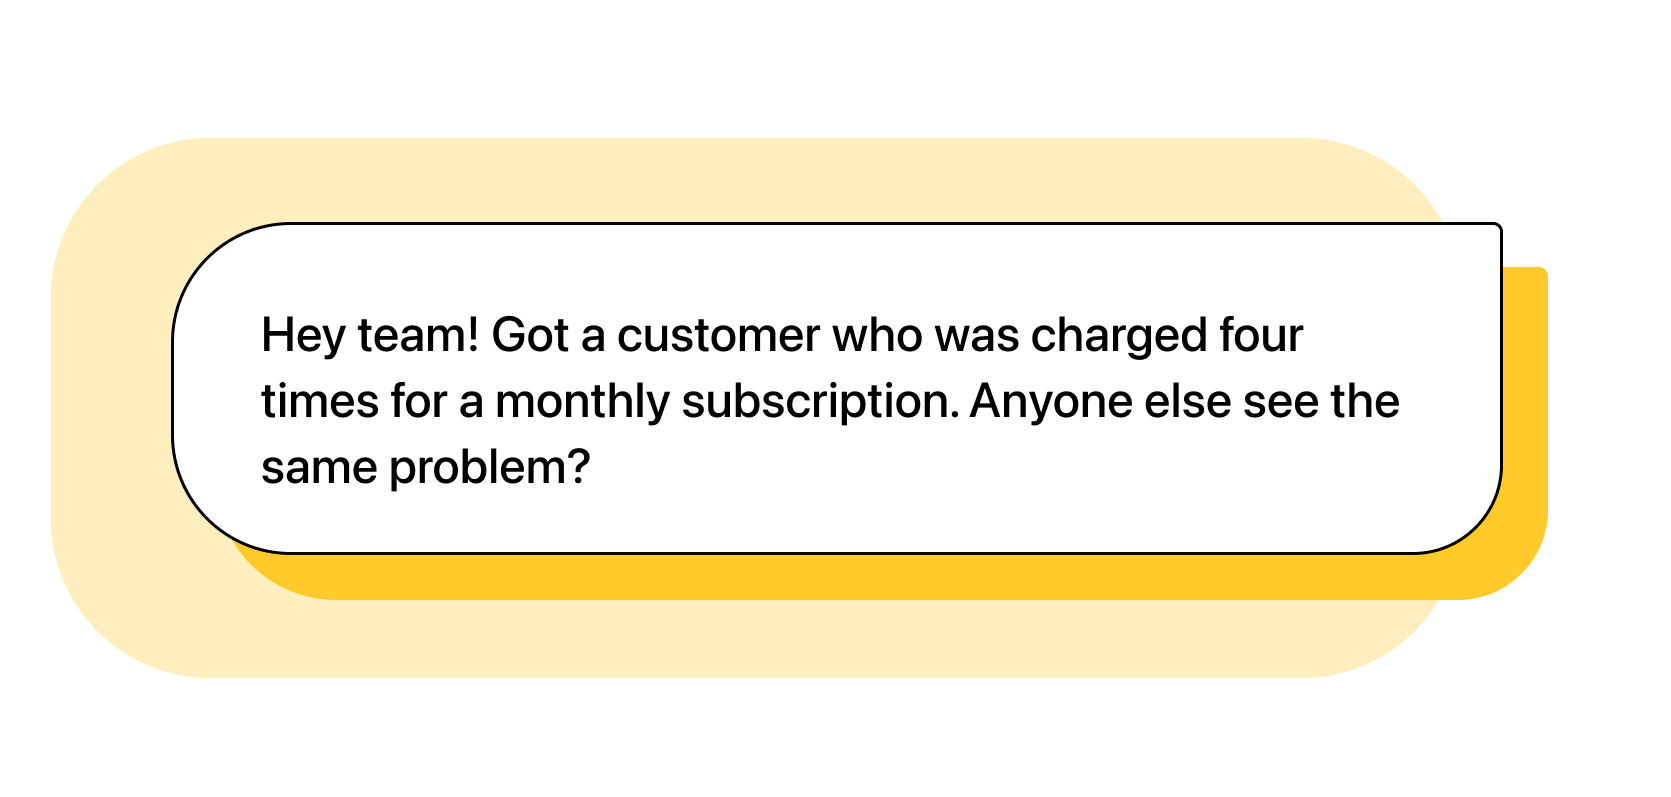 Agent: Hey team! Got a customer who was charged four times for a monthly subscription. Anyone else see the same problem?